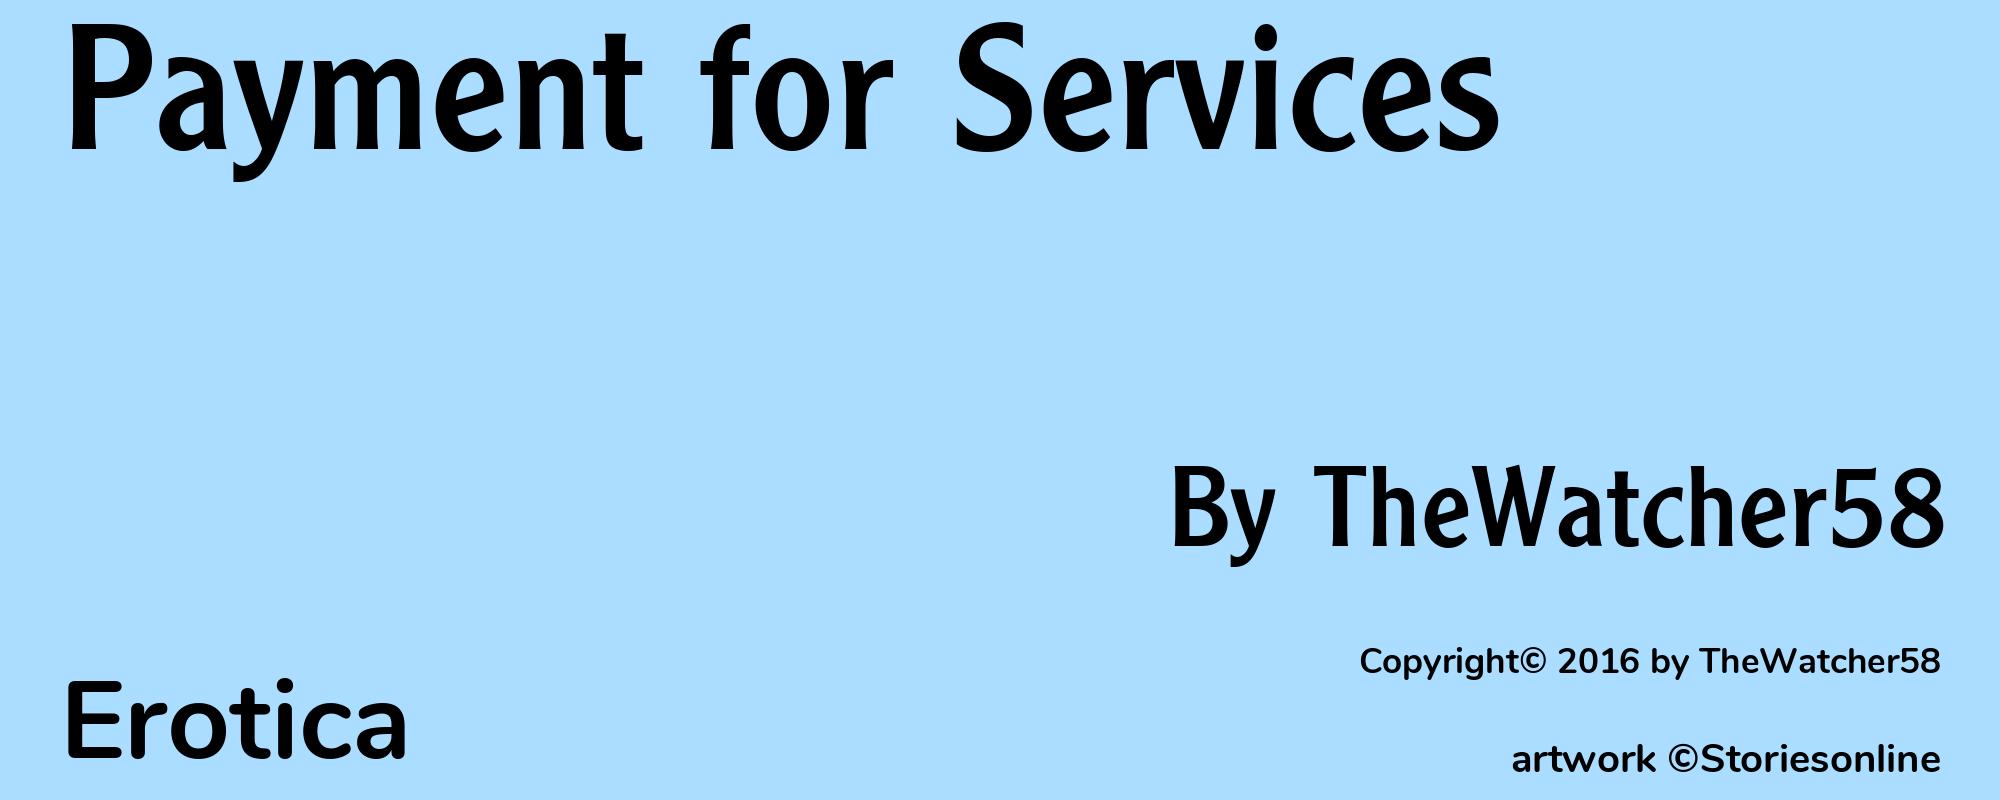 Payment for Services - Cover